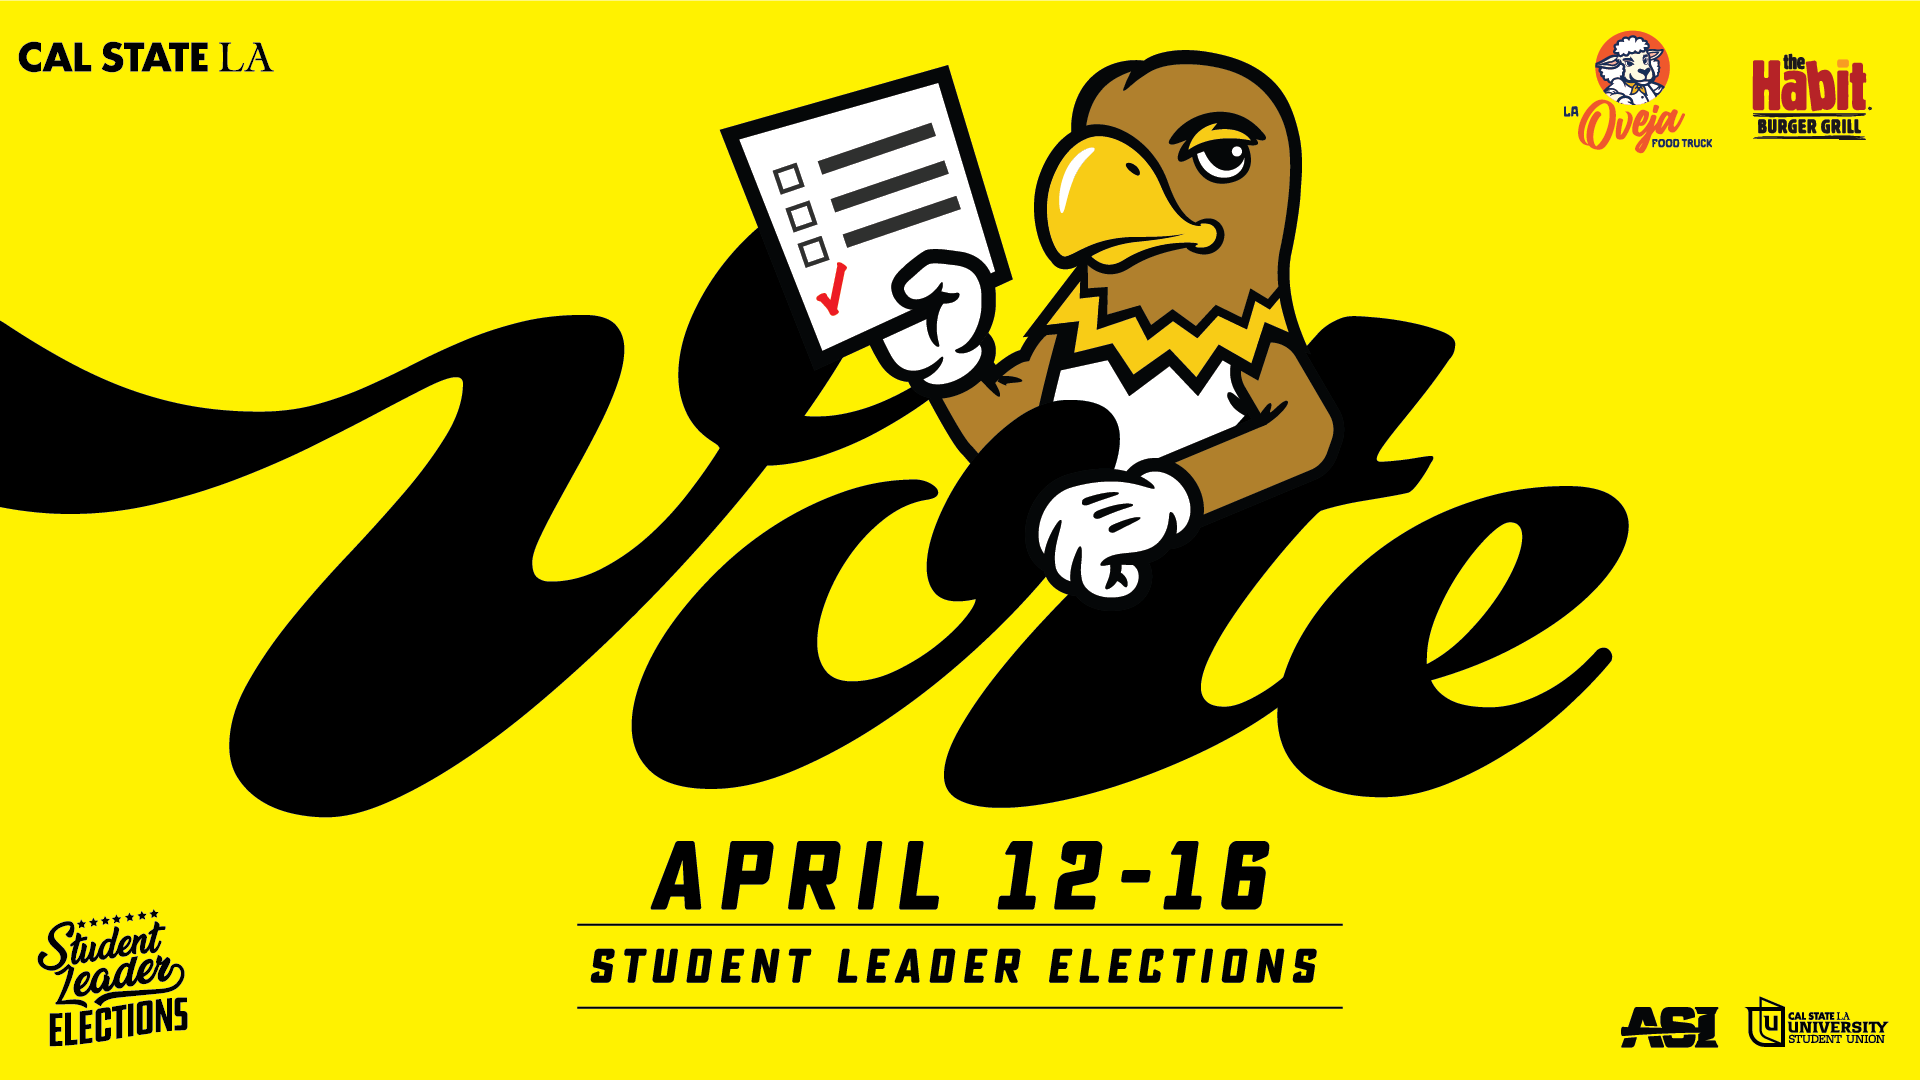 Student Leader Elections Home Page Header